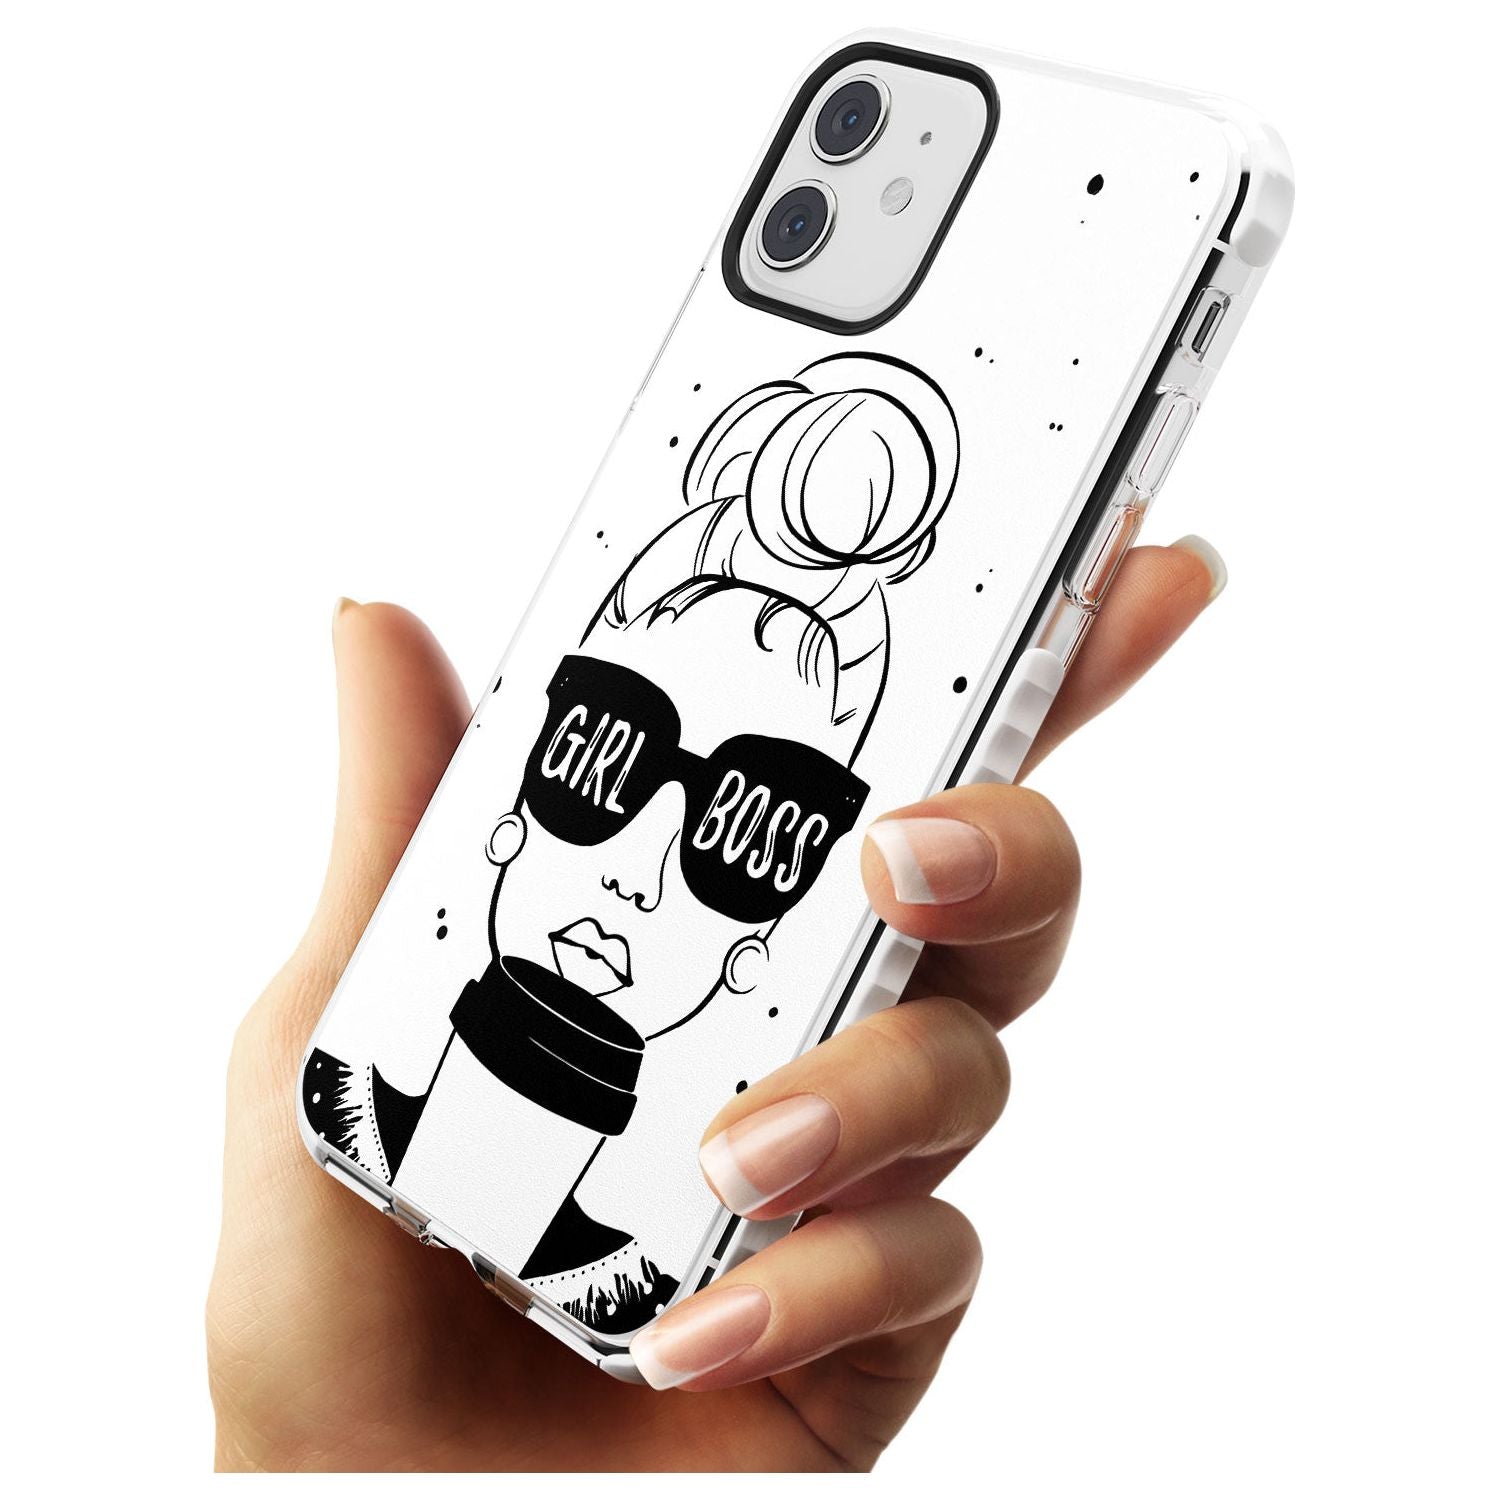 Girl Boss Impact Phone Case for iPhone 11